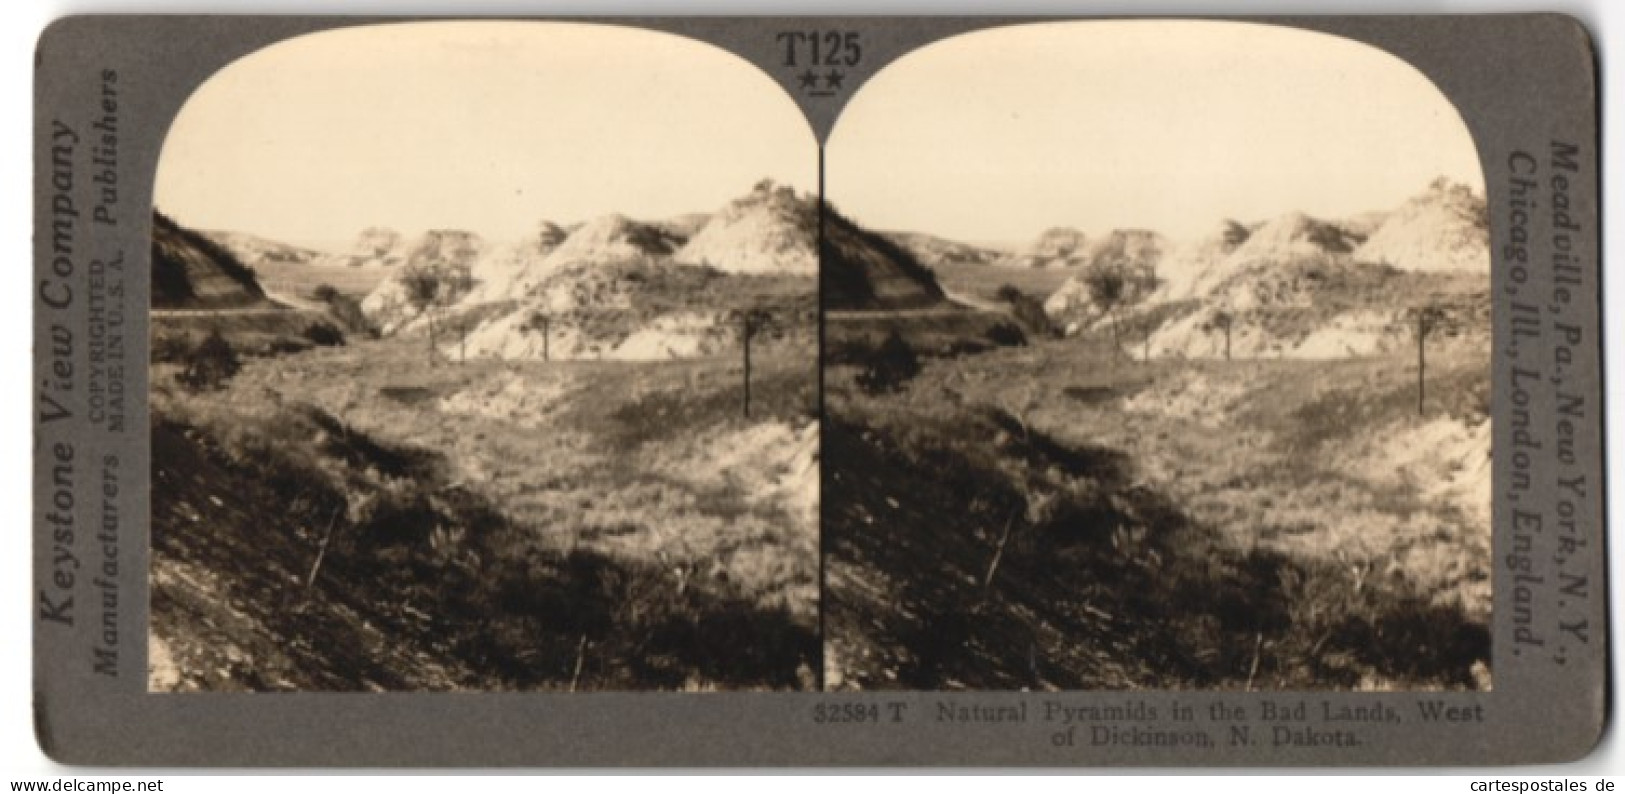 Stereo-Fotografie Keystone View Co., Meadville / PA., Ansicht Dickinson / ND, Natural Pyramids In The Bad Lands  - Stereoscopic